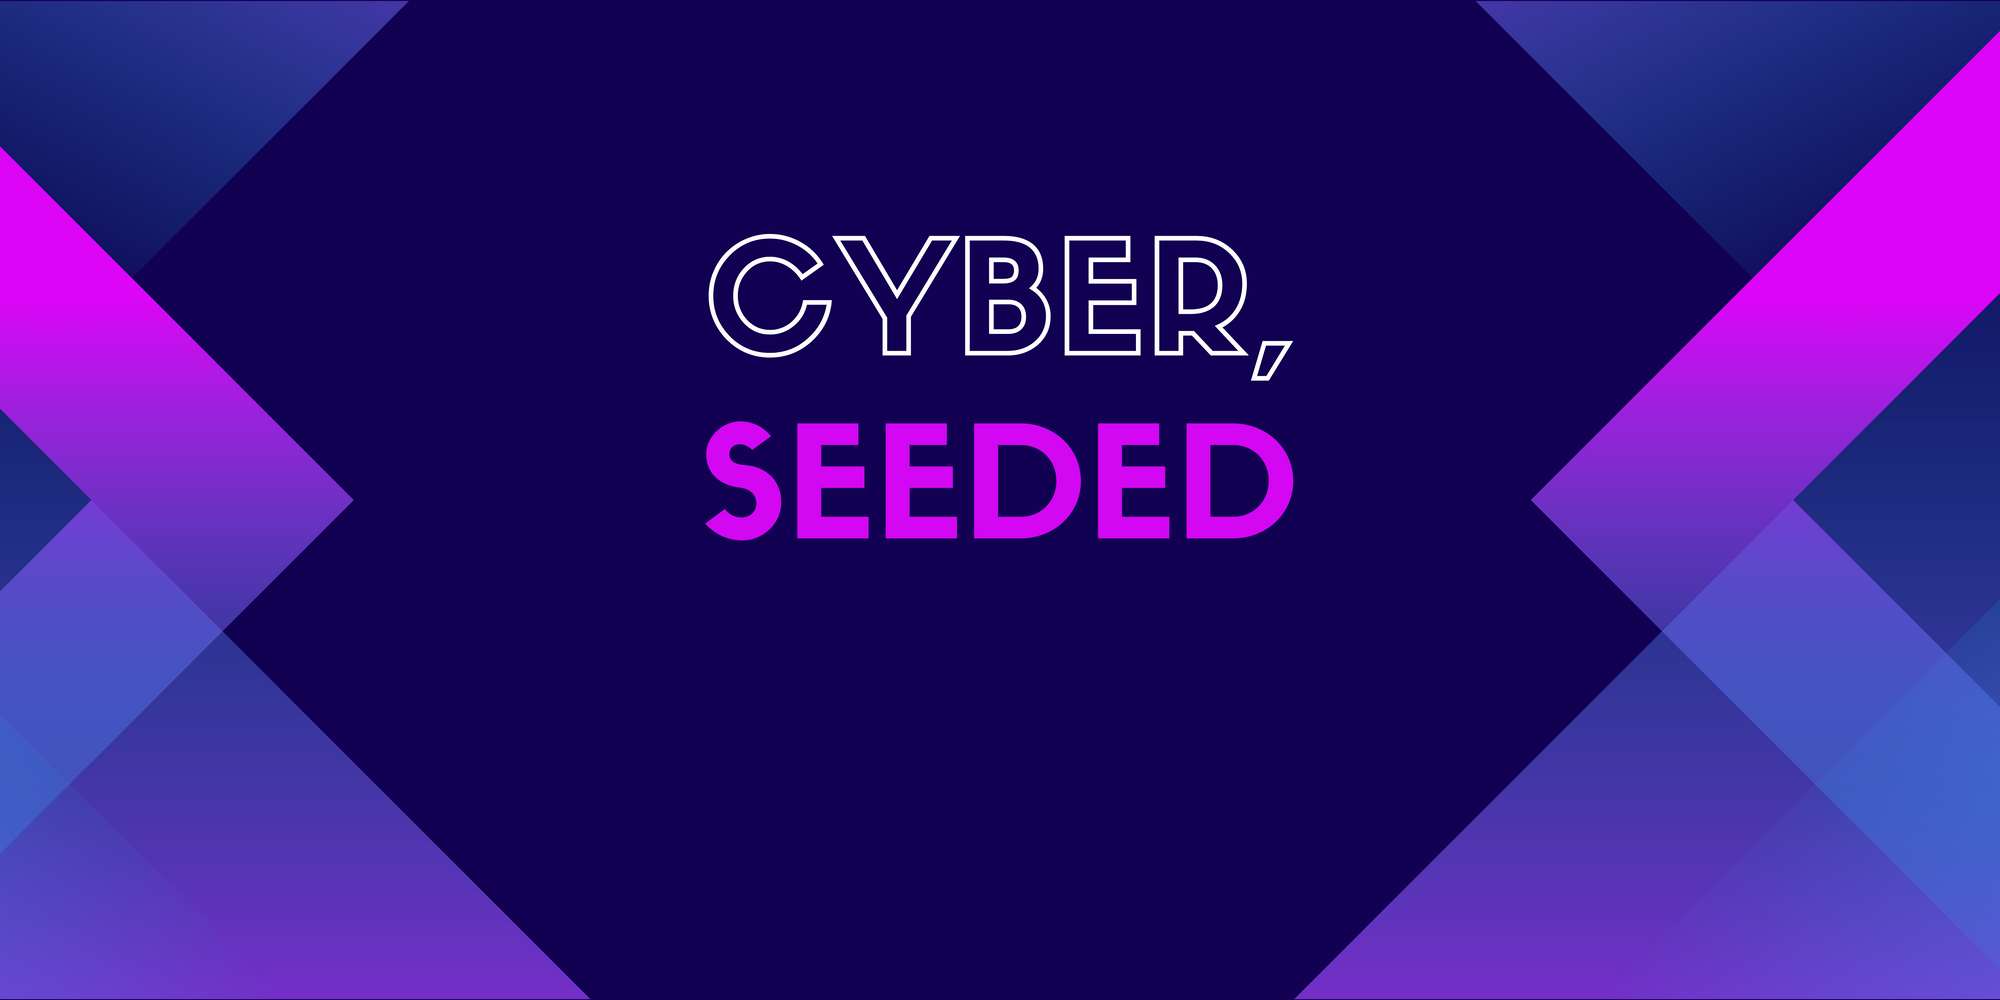 Cyber, Seeded